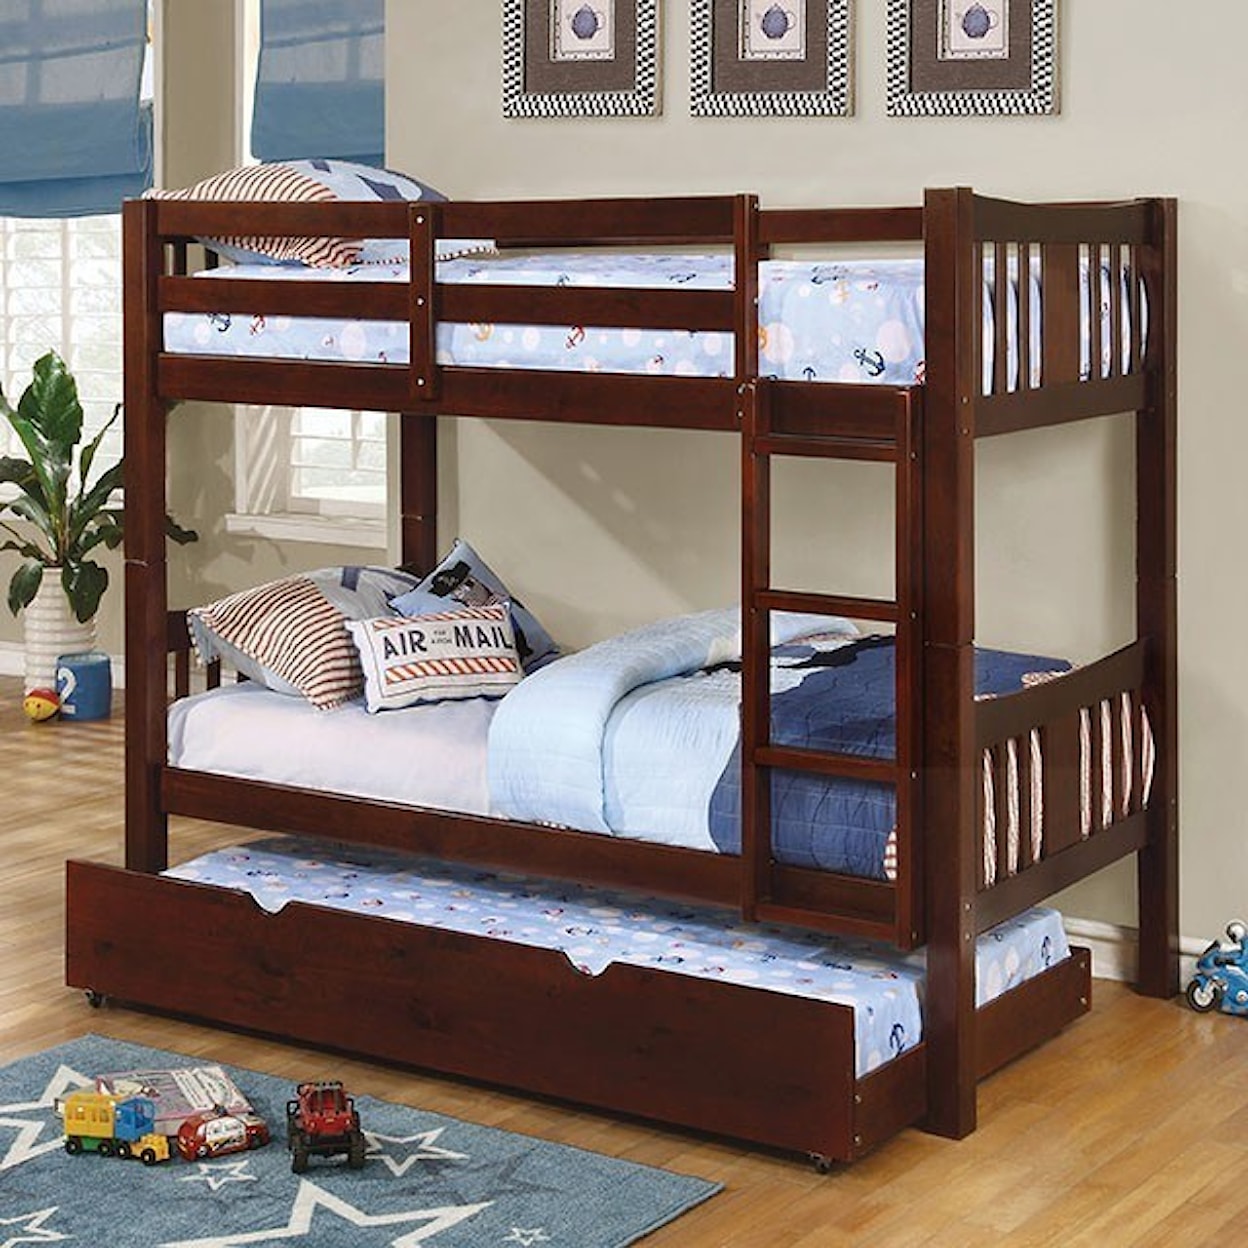 Furniture of America Cameron Full over Full Bunk Bed